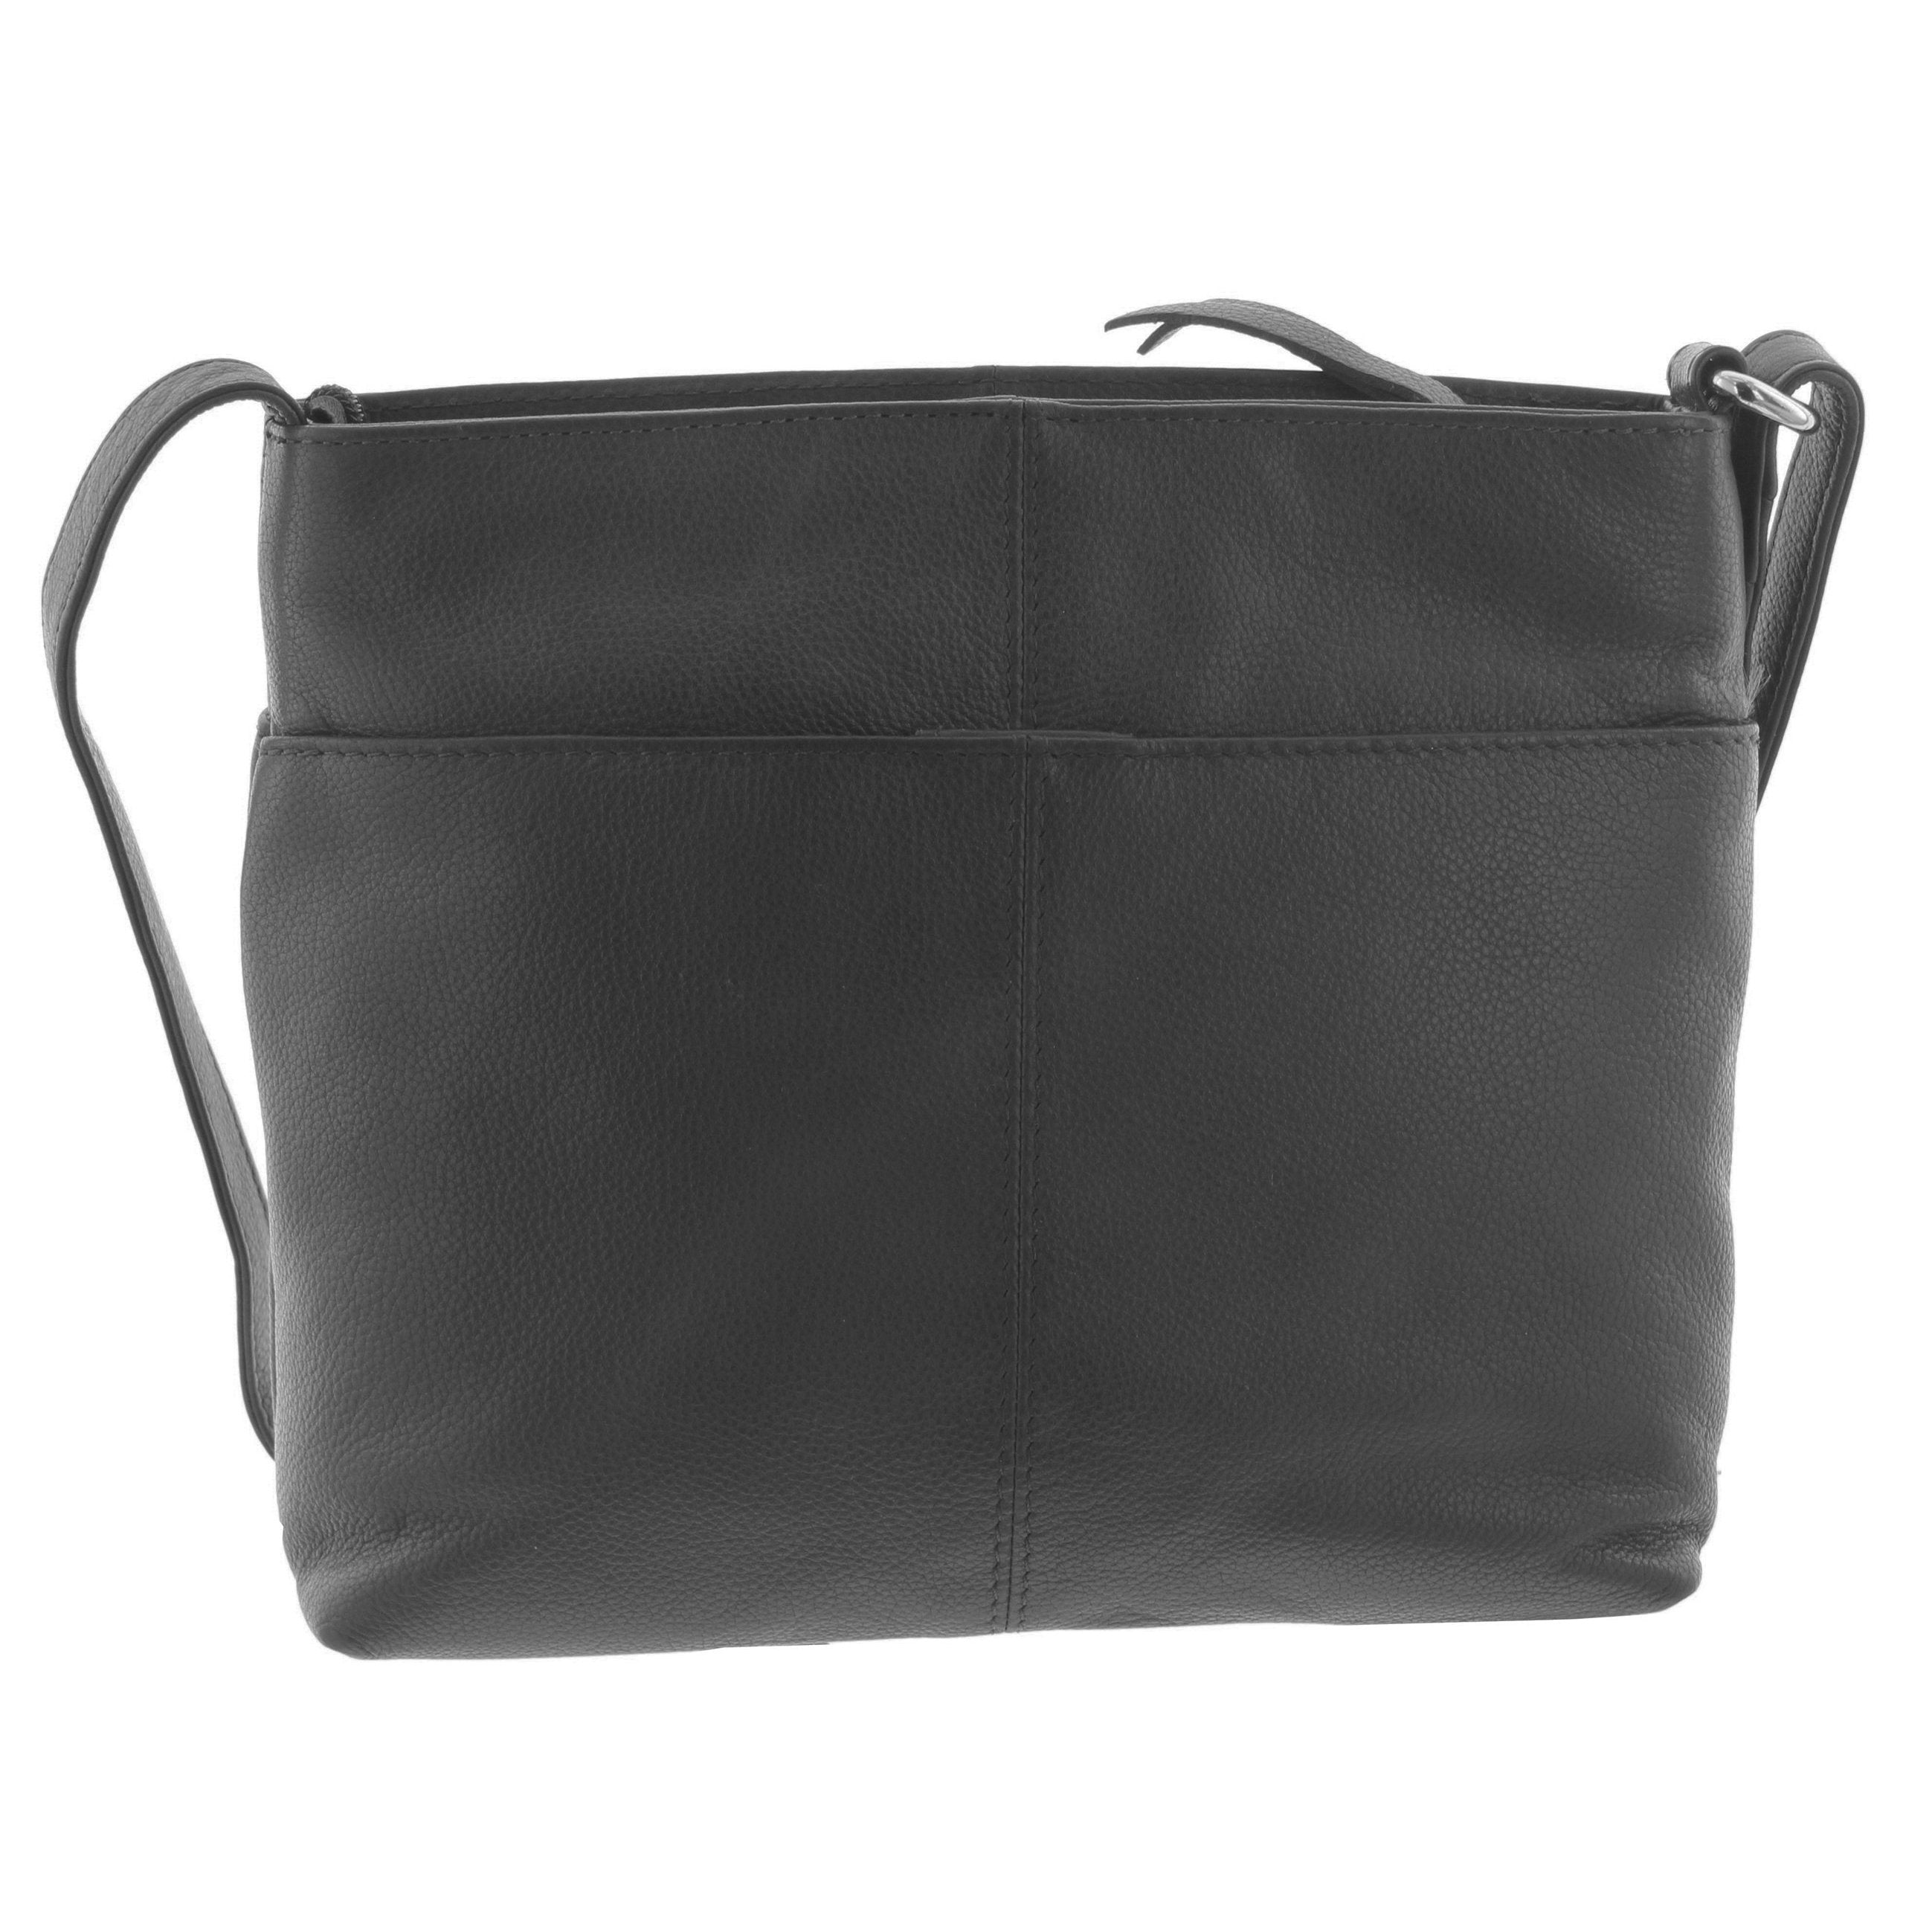 STORM London CAMPBELL Leather Cross Body Bag